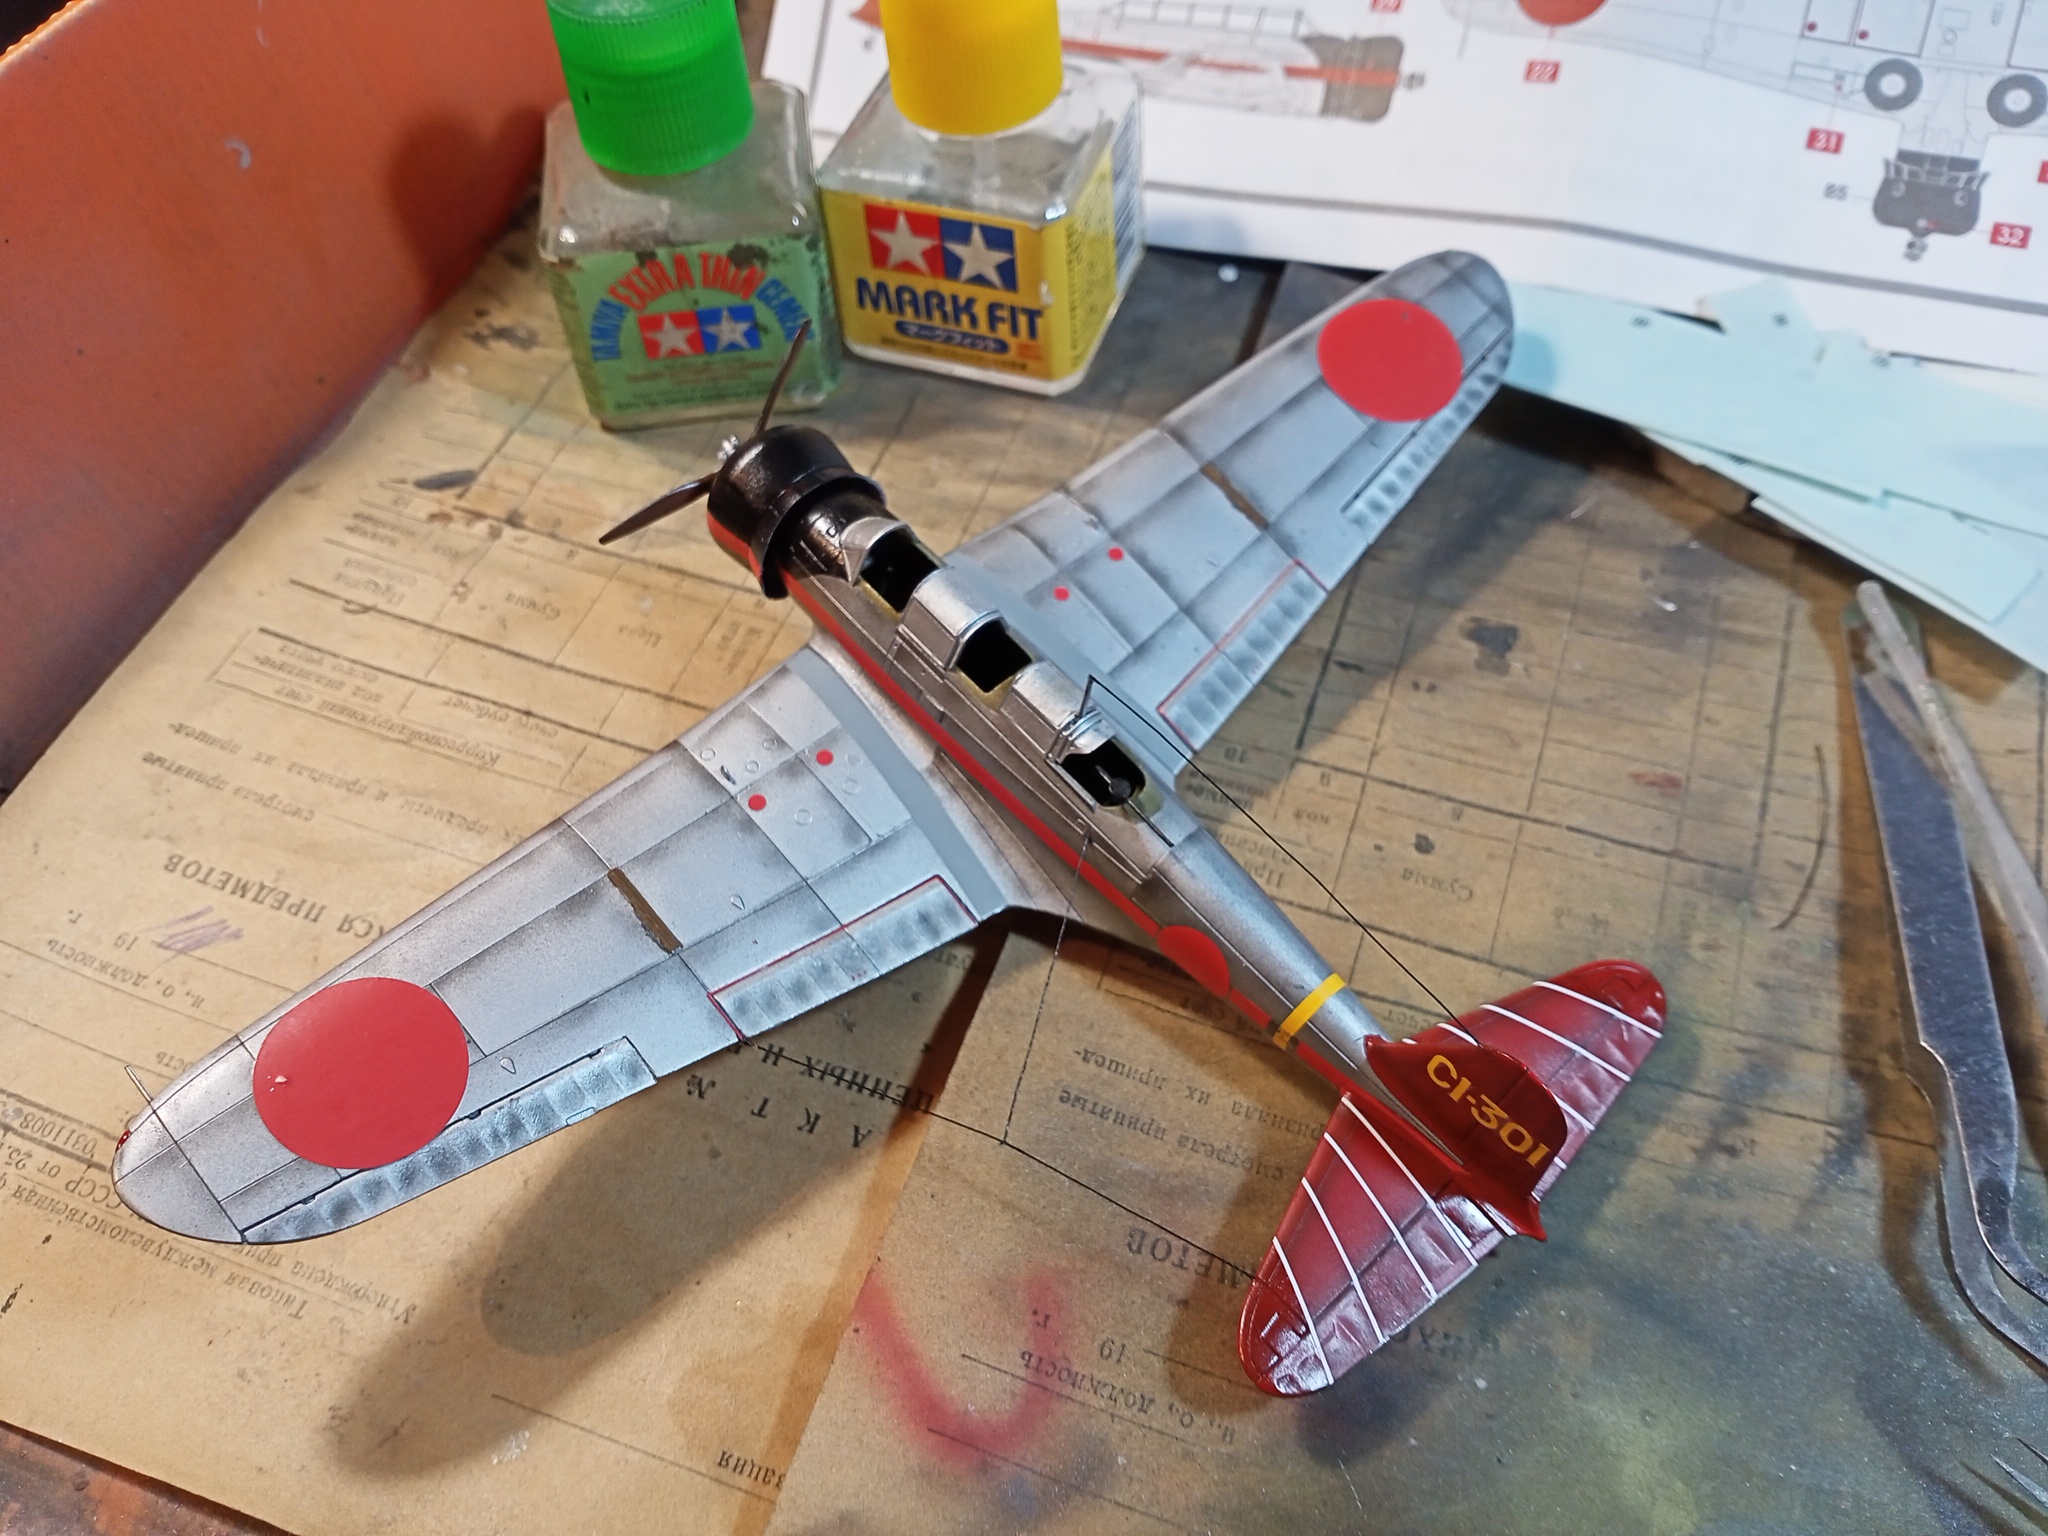 Nakajima B5N1 (1/72 Airfix). - My, Modeling, Stand modeling, Aircraft modeling, Prefabricated model, Assembly, Airbrushing, Miniature, Airplane, , Aviation, The Second World War, Japan, With your own hands, Needlework with process, Needlework, Hobby, Torpedo bomber, Bomber, Longpost